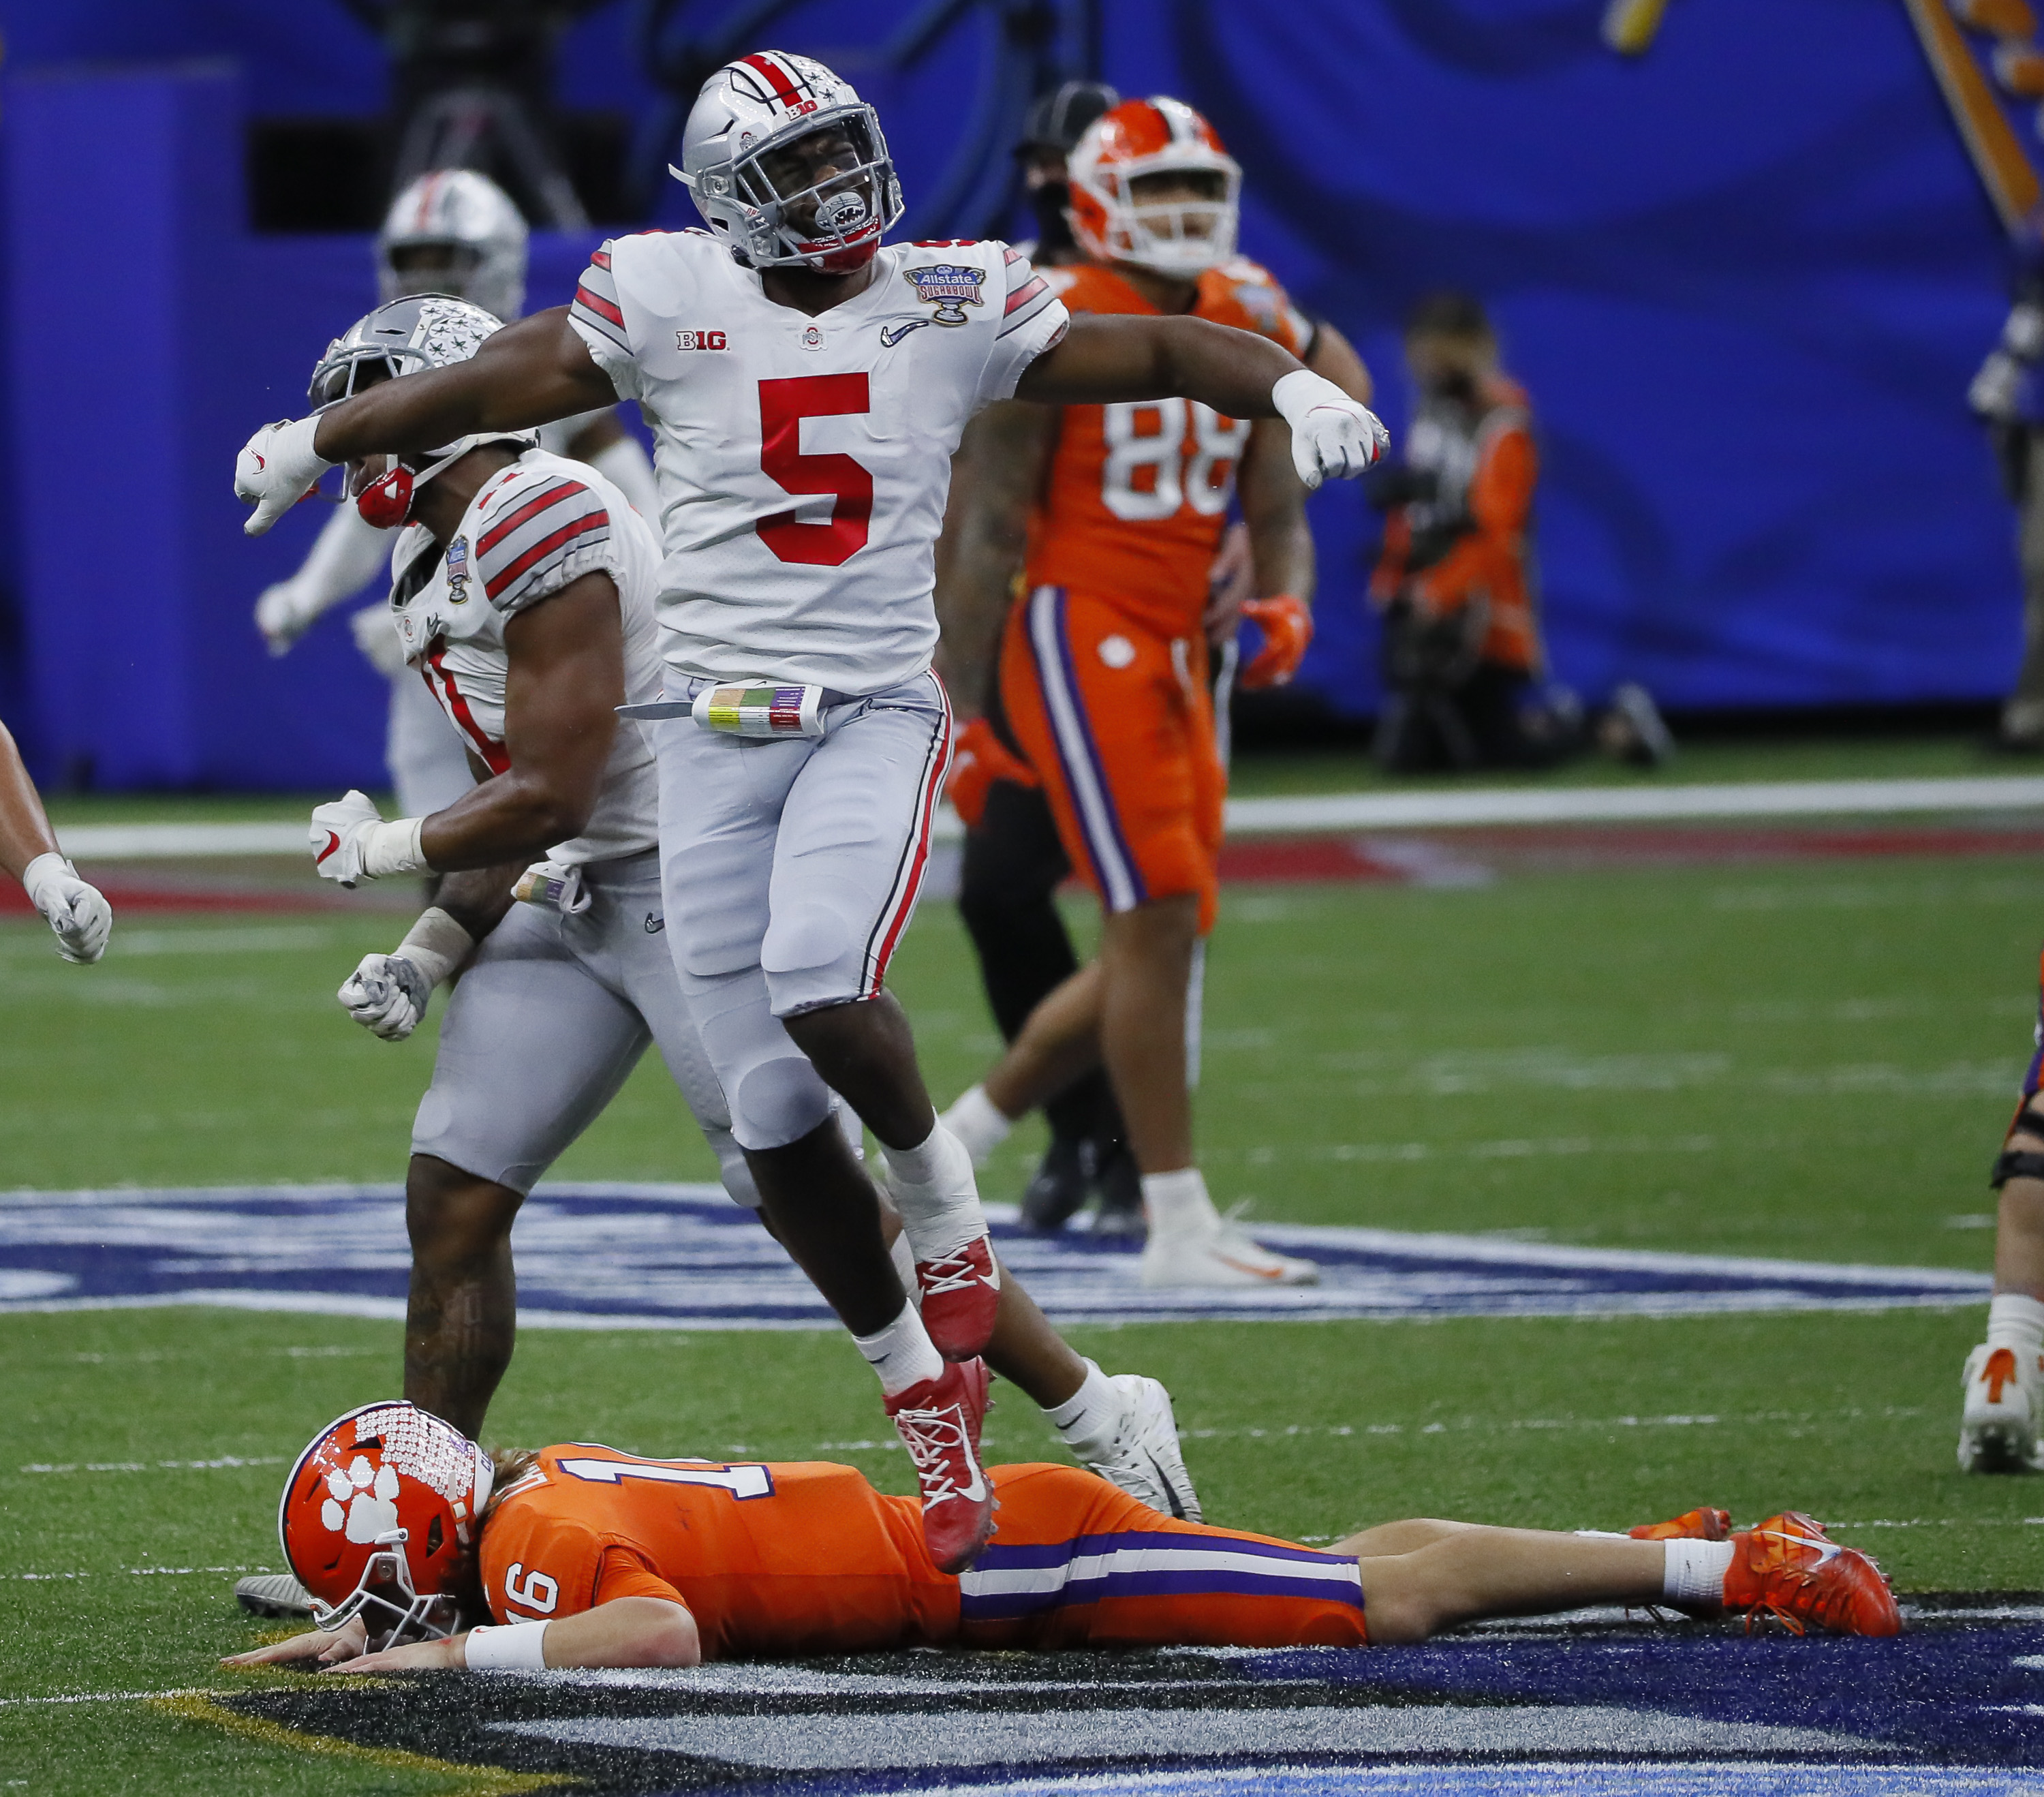 Ohio State Buckeyes linebacker Baron Browning (5) celebrates a fourth down stop as he leaps over Clemson Tigers quarterback Trevor Lawrence (16) during the fourth quarter of the College Football Playoff semifinal at the Allstate Sugar Bowl in the Mercedes-Benz Superdome in New Orleans on Friday, Jan. 1, 2021. Ohio State won 49-28